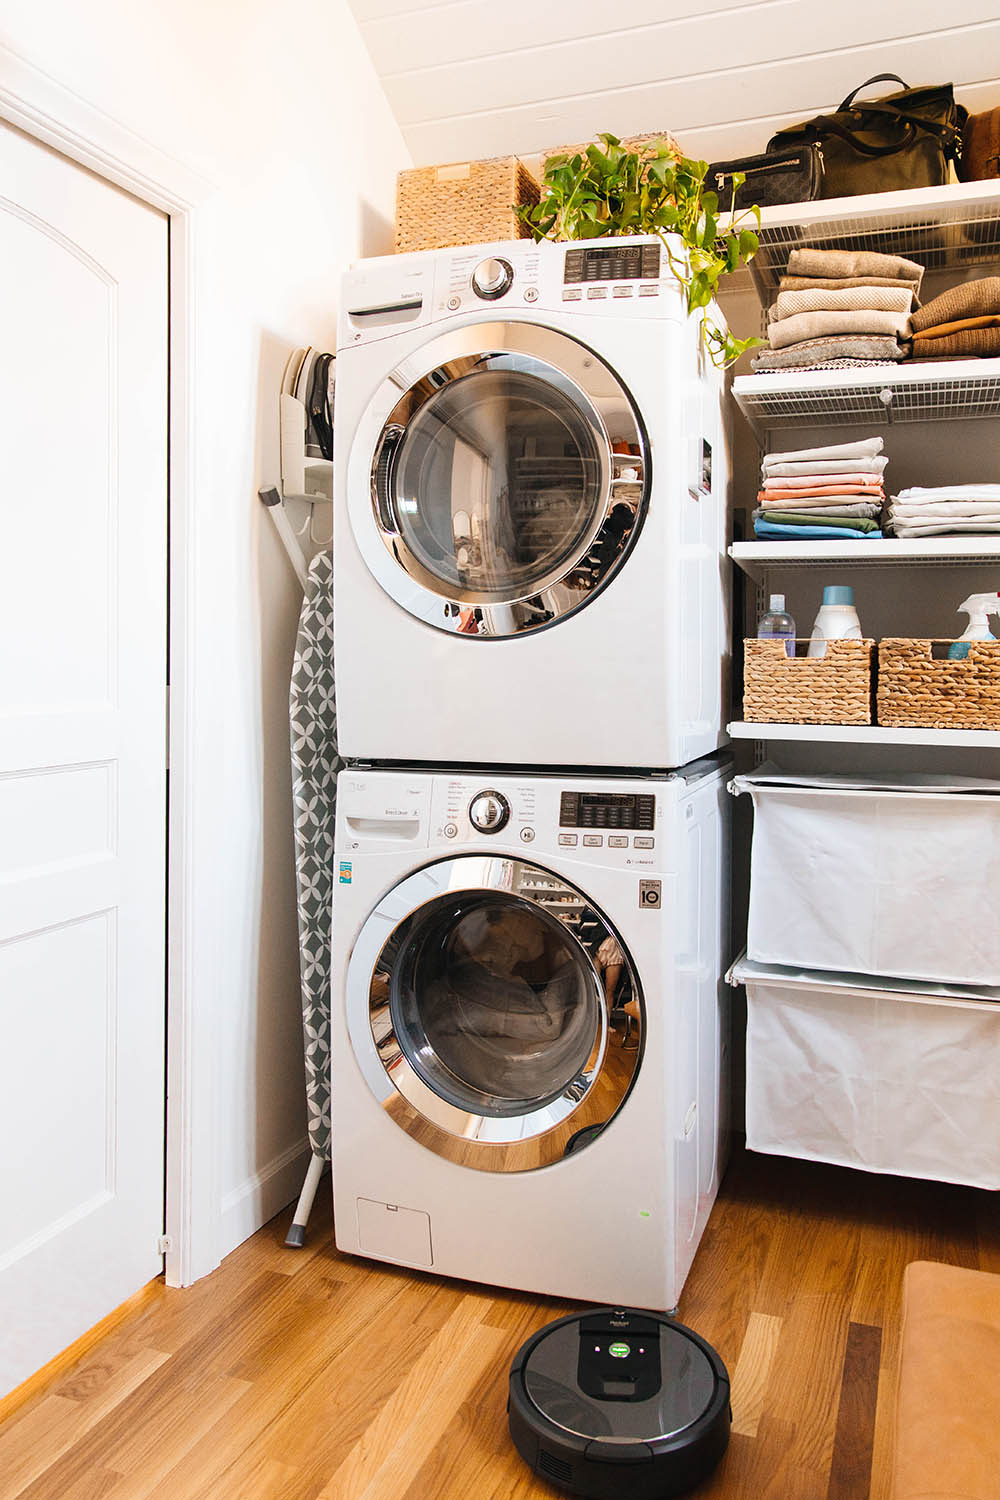 A laundry room with white LG front load laundry appliances, shelving, and a Roomba.